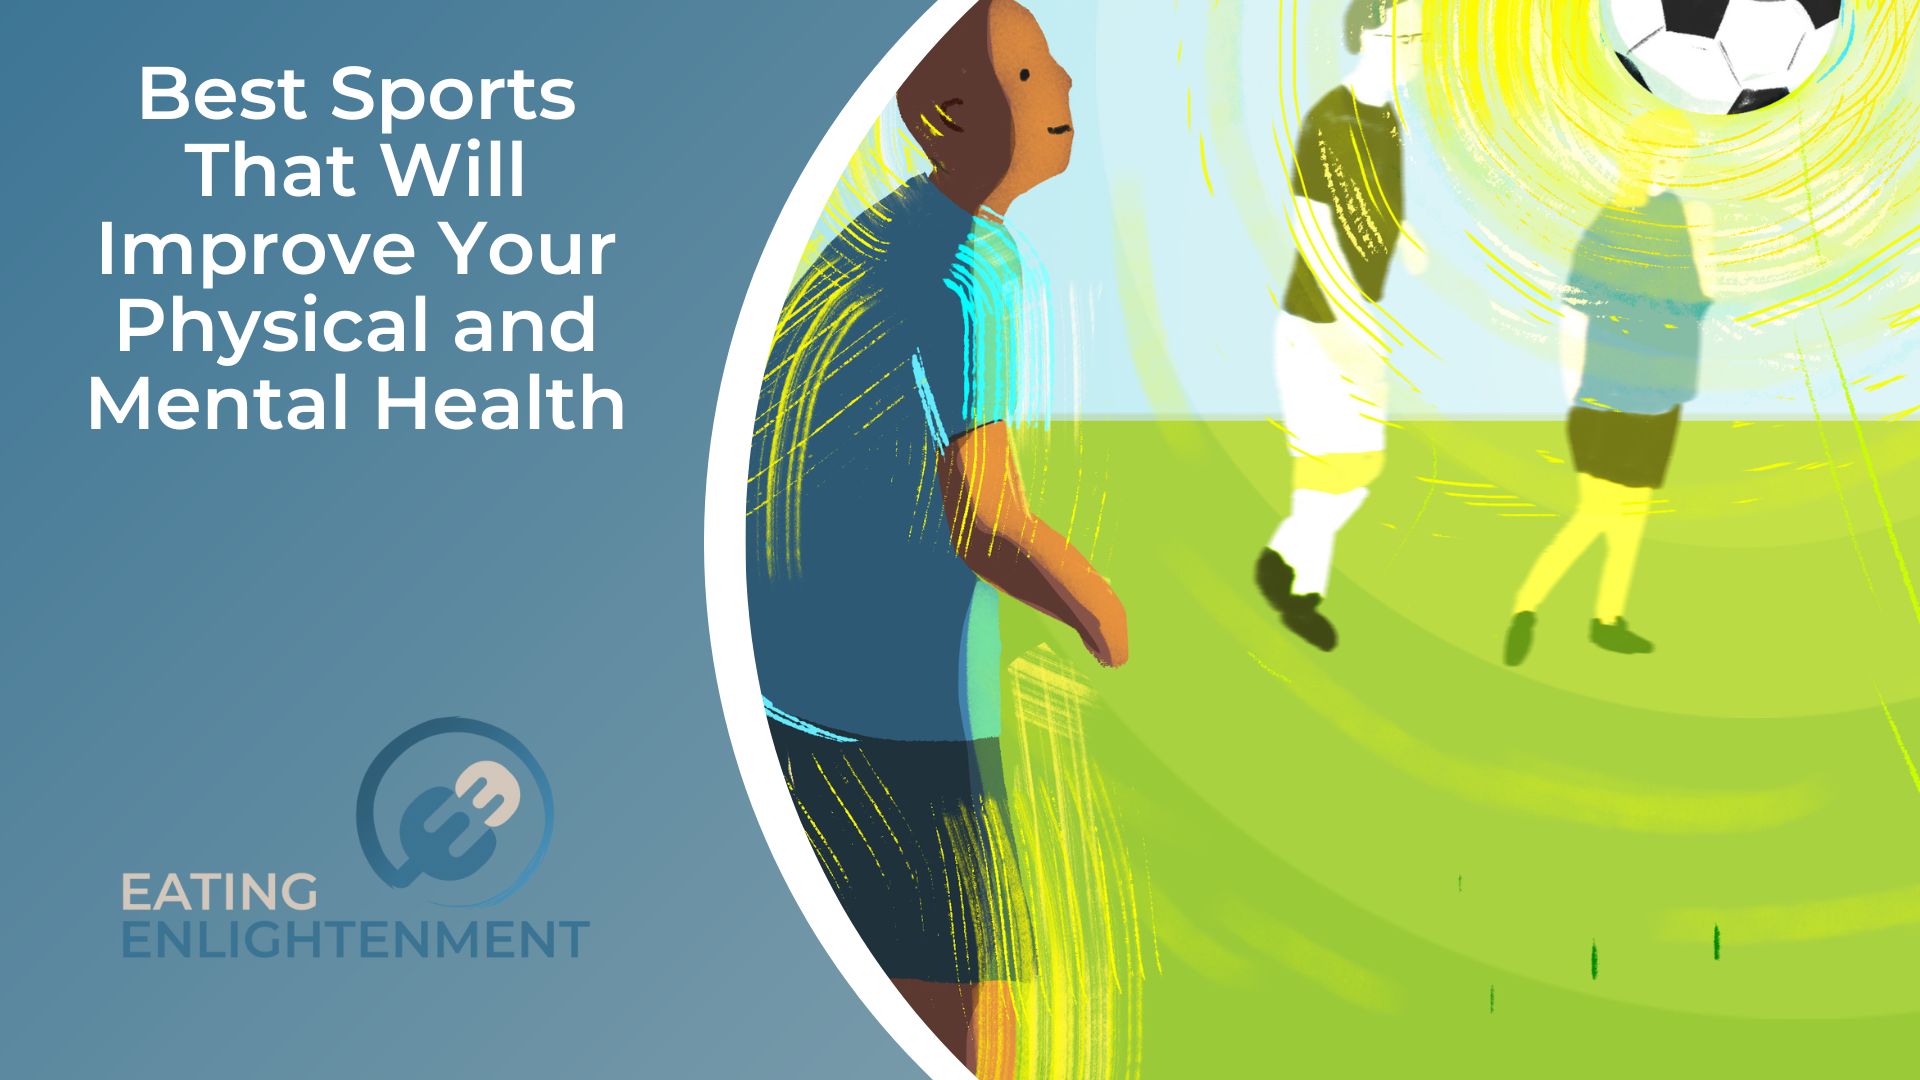 Best Sports That Will Improve Your Physical and Mental Health